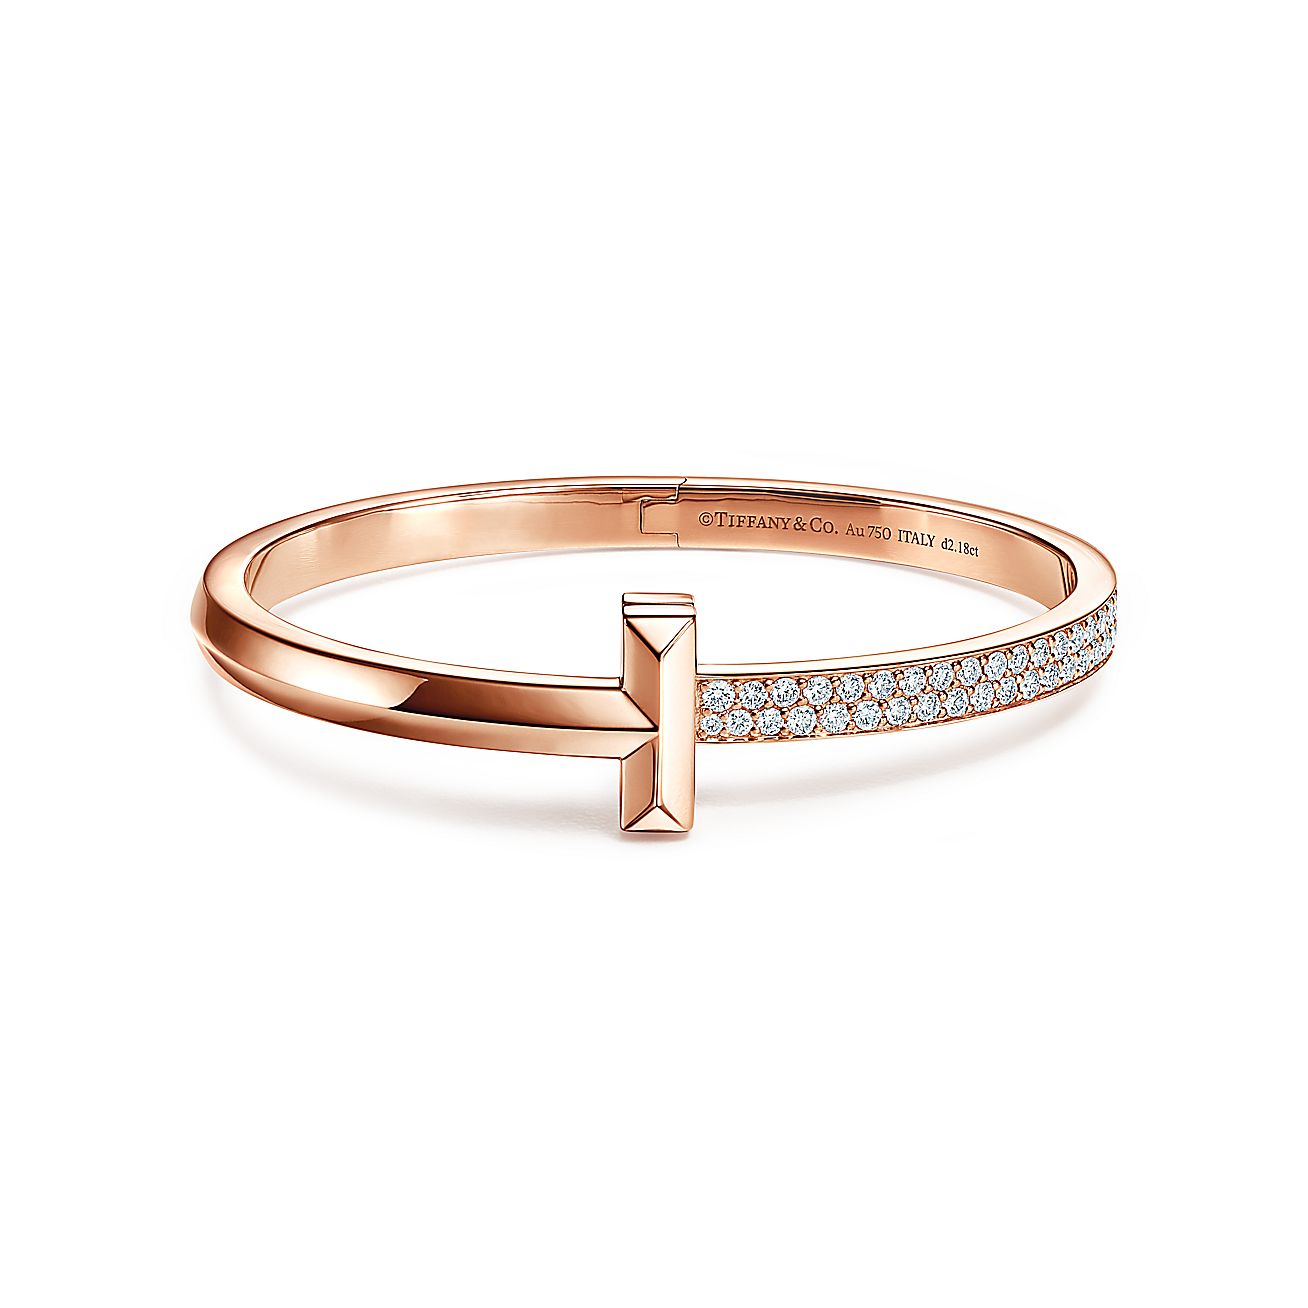 Tiffany T T1 Wide Diamond Hinged Bangle in 18k Gold - Click Image to Close